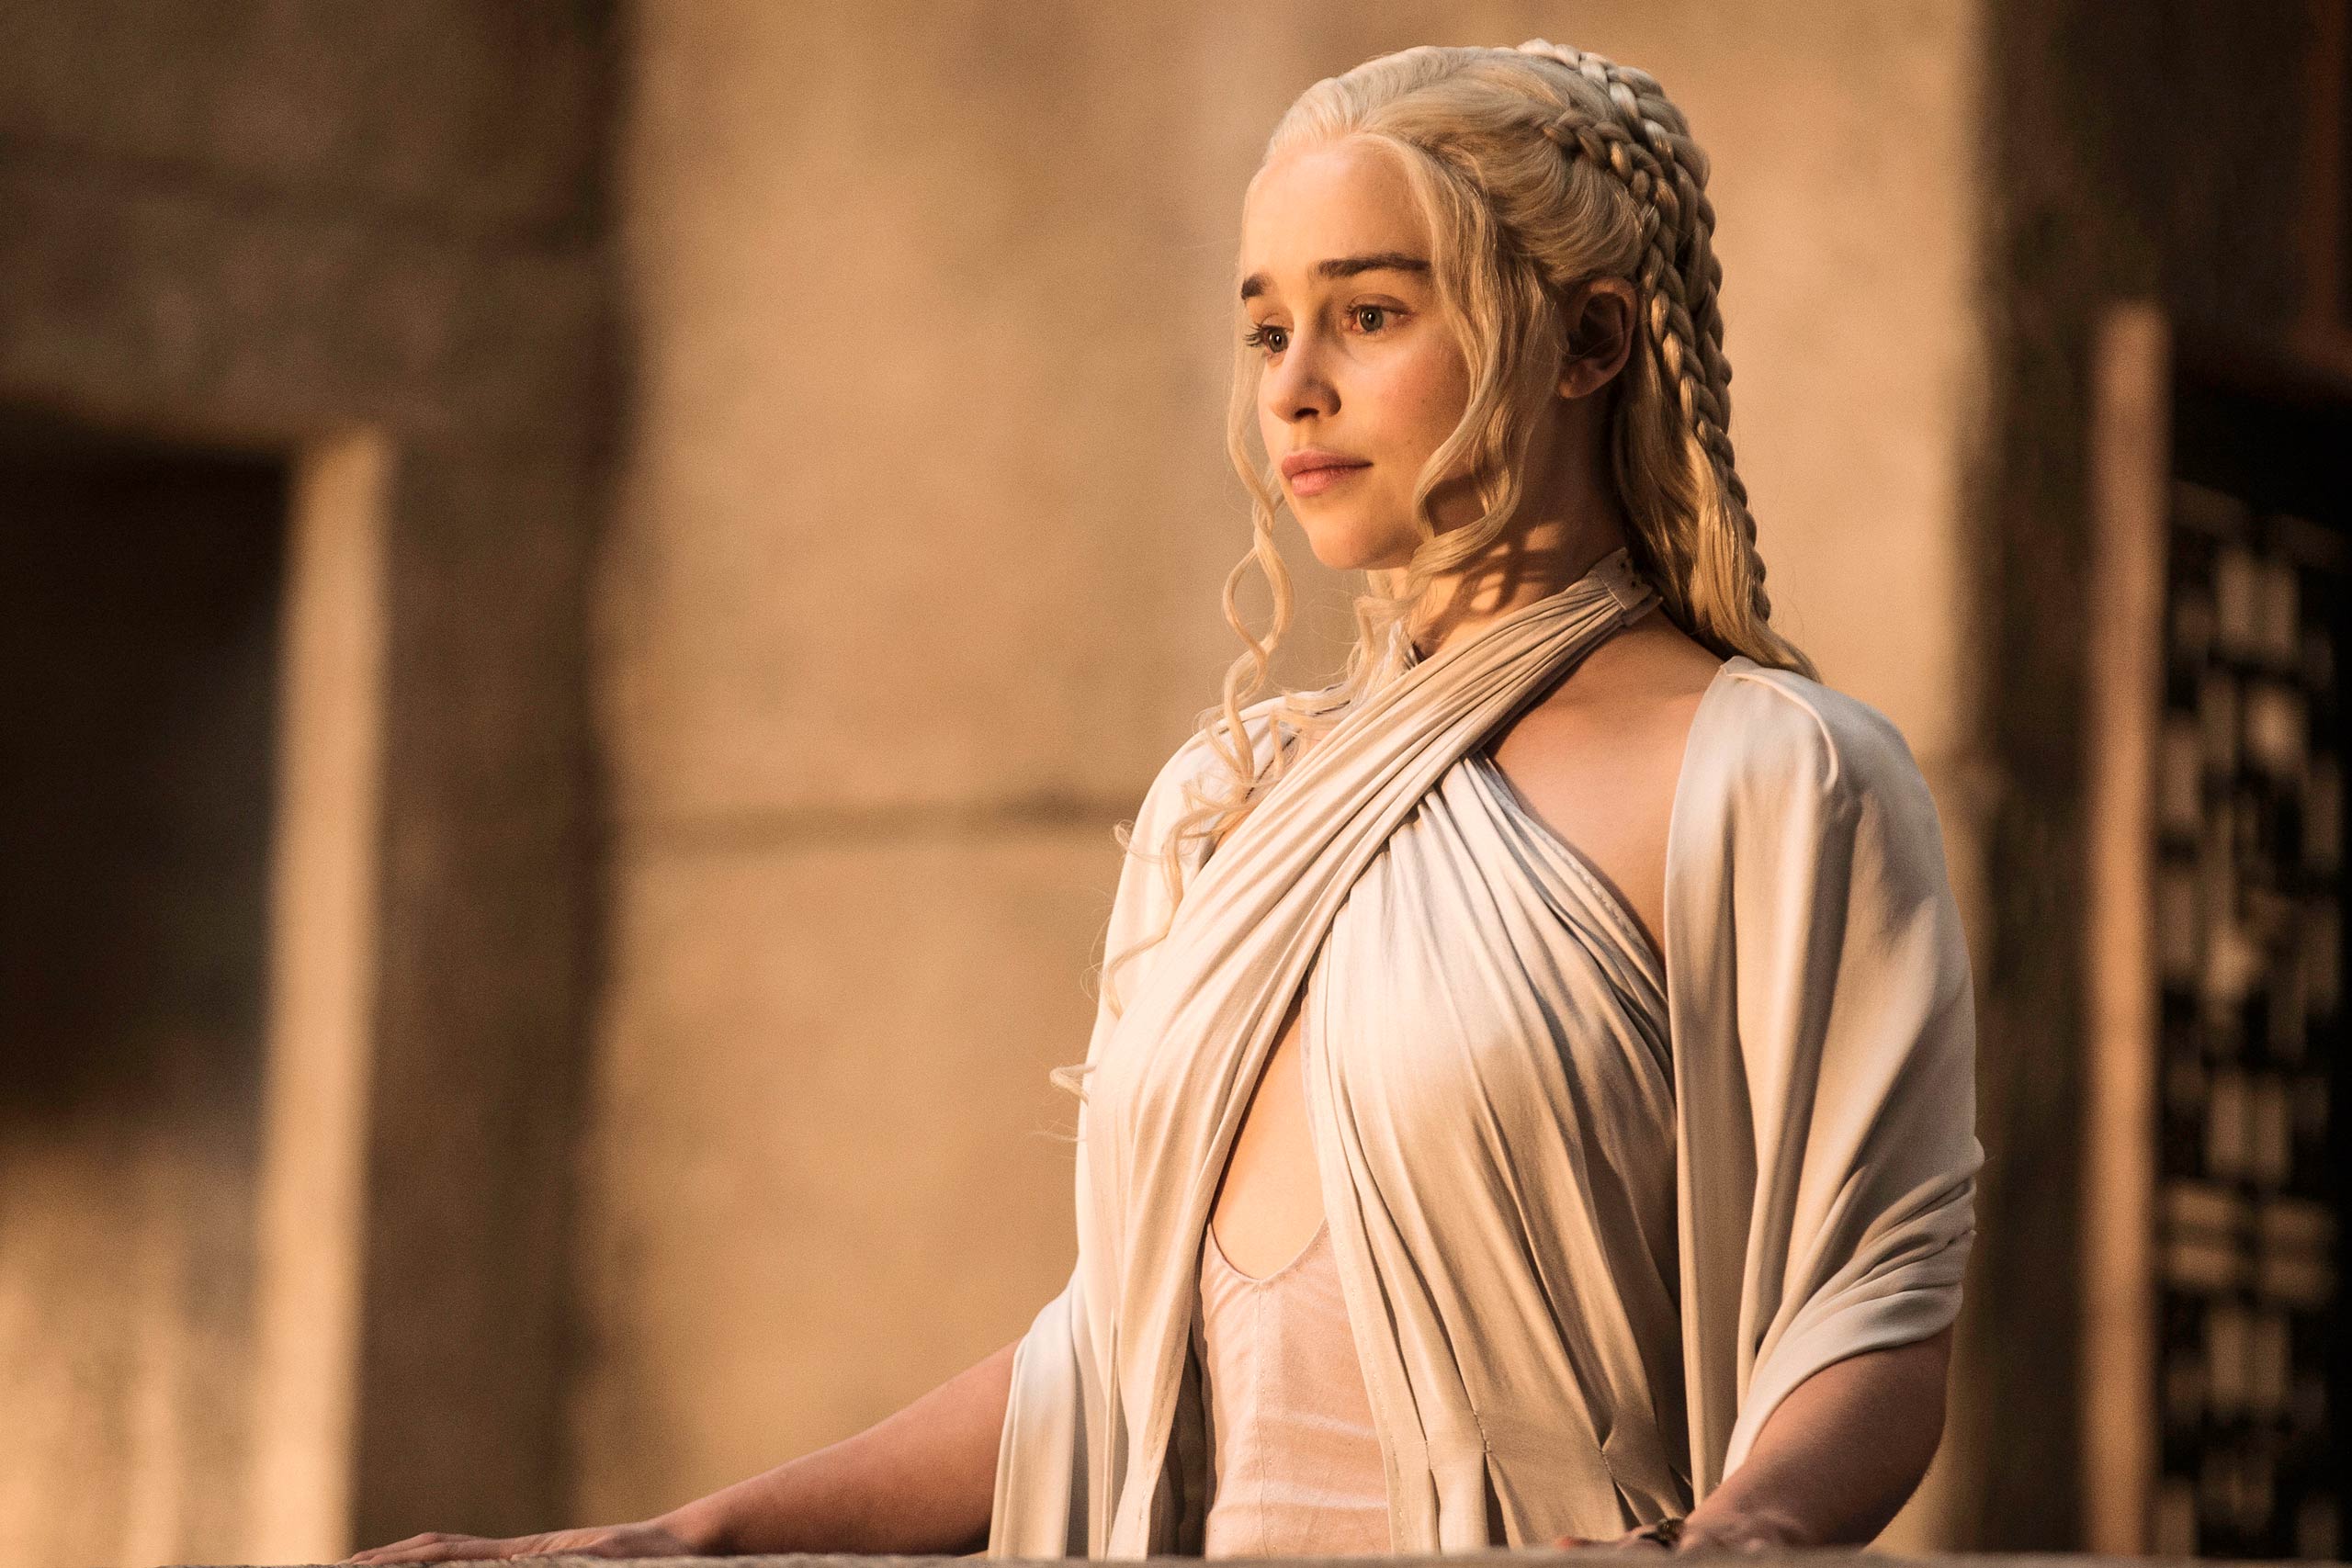 Mittens Decrepit ghost Game of Thrones Recap: Season 5 Episode 1 Premiere "The Wars to Come" | Time